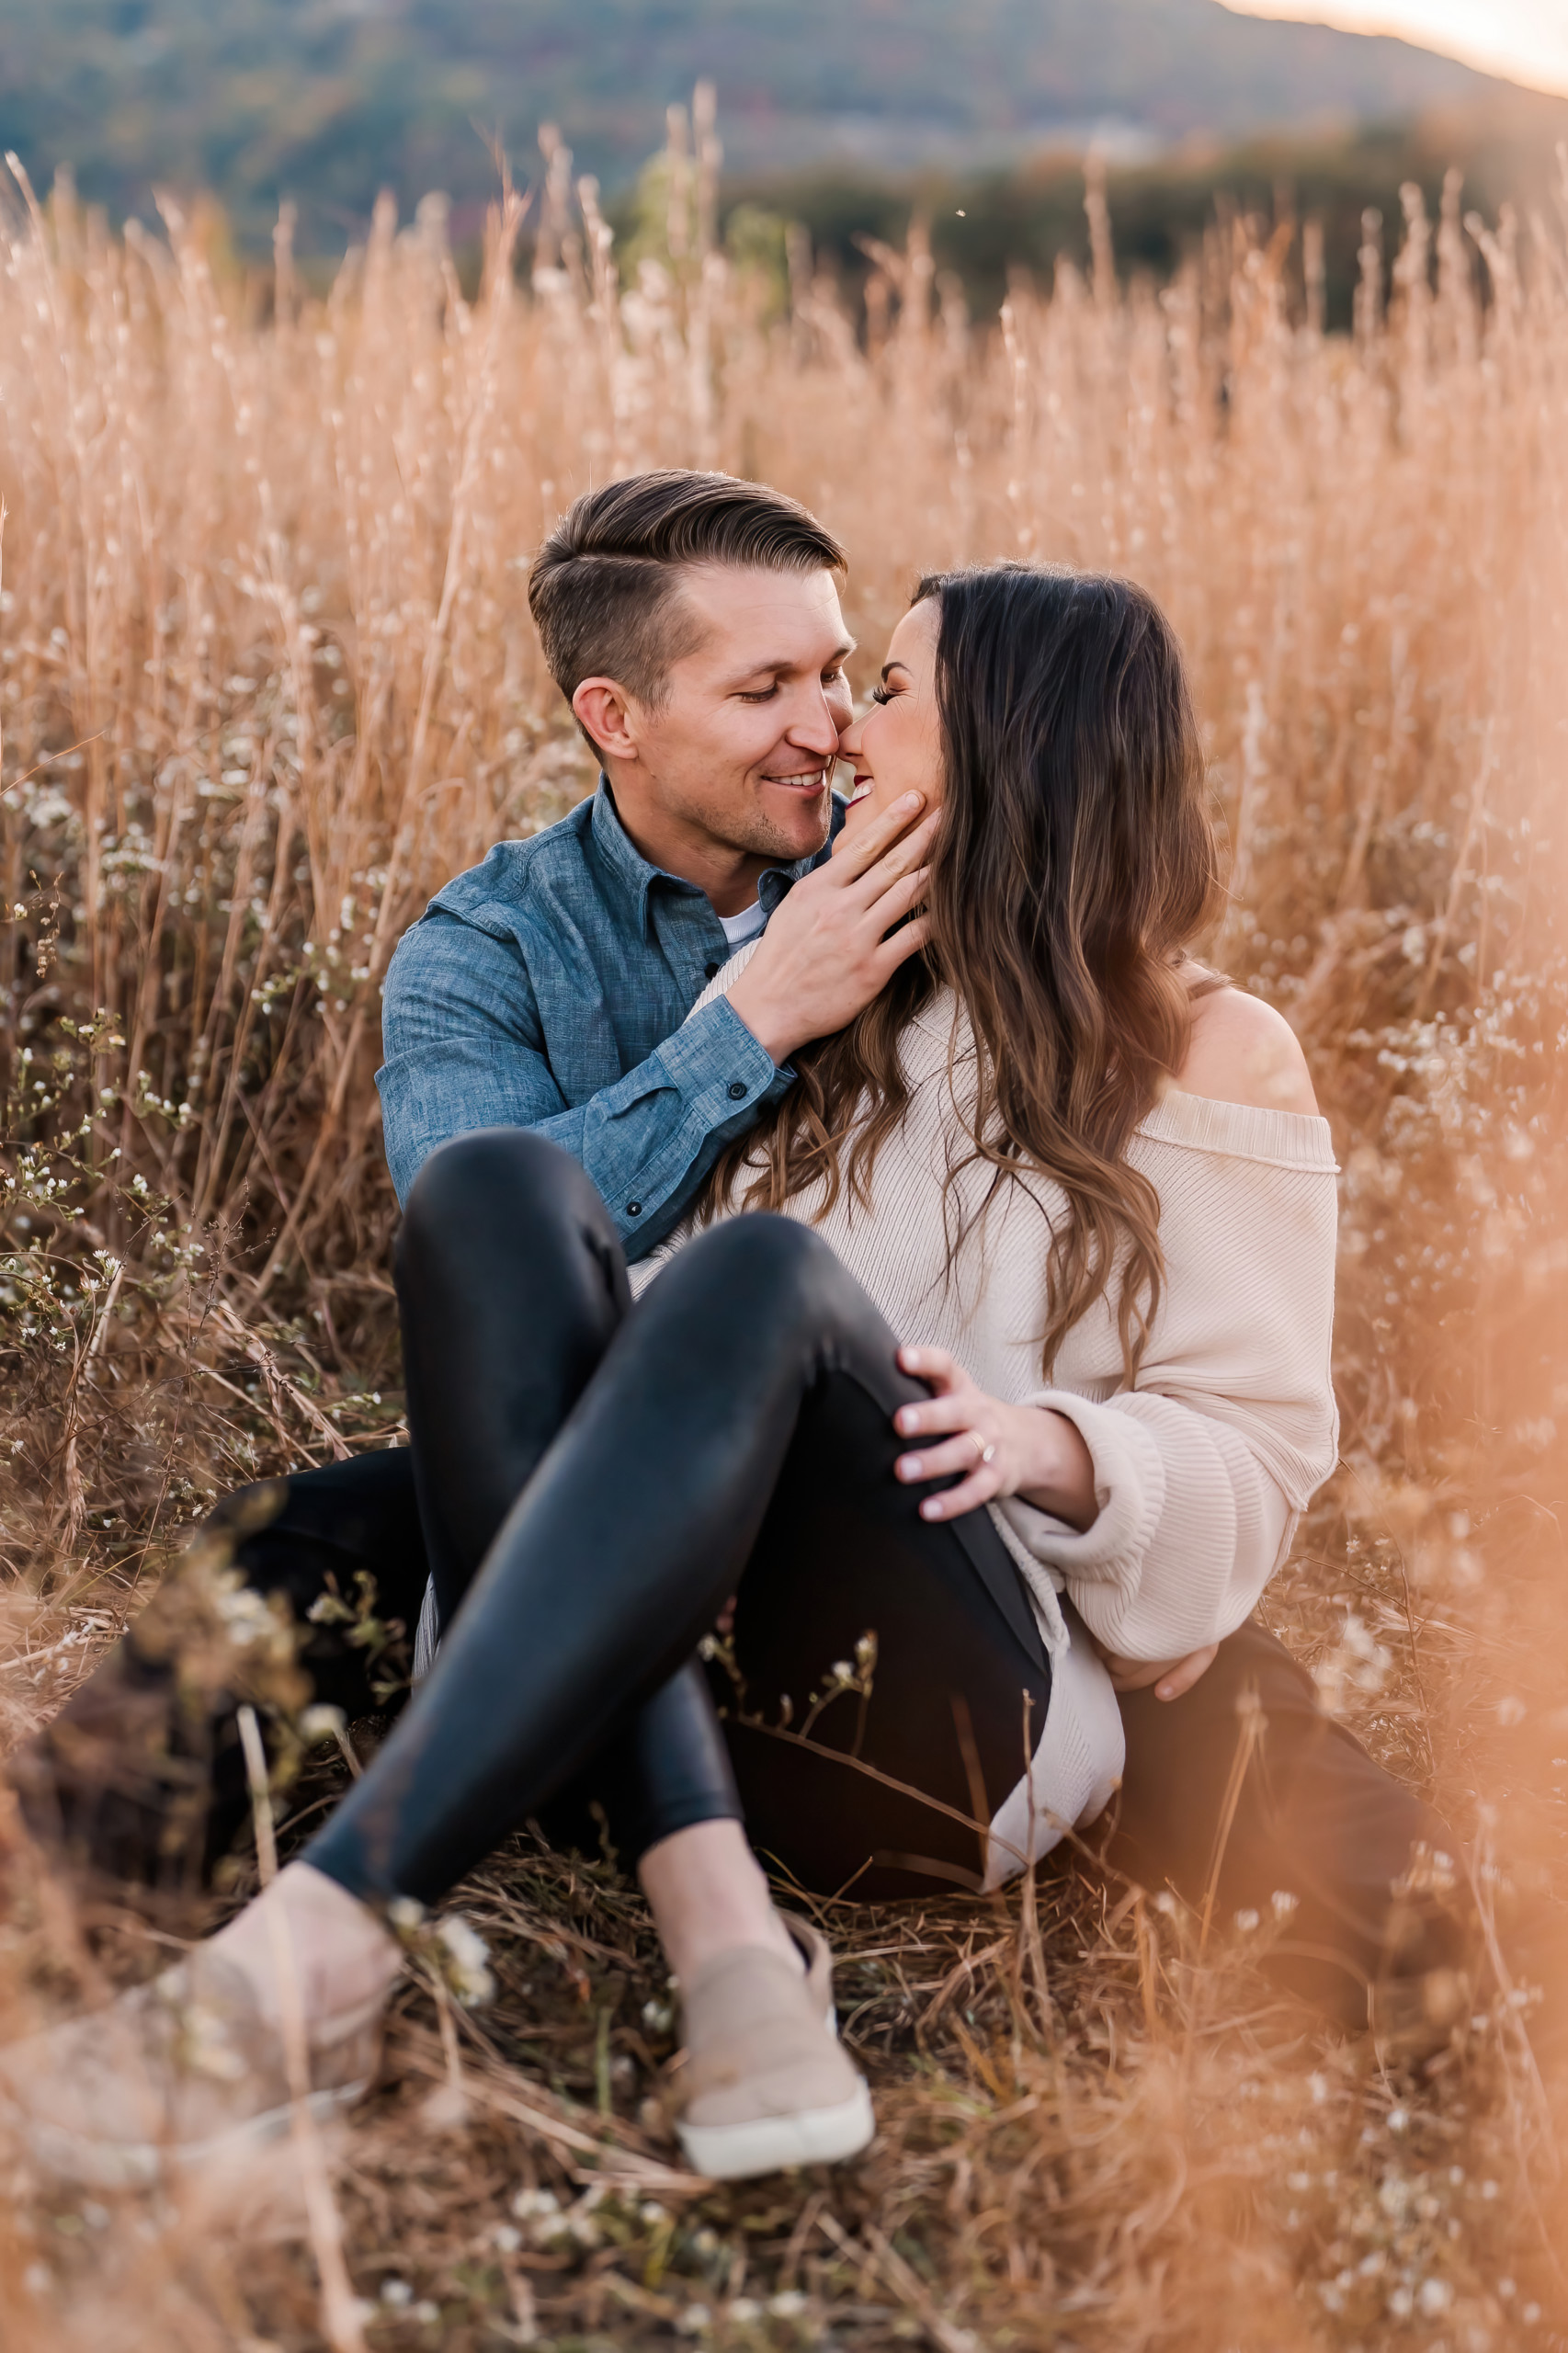 Fall Engagement Photos Couple Smiling